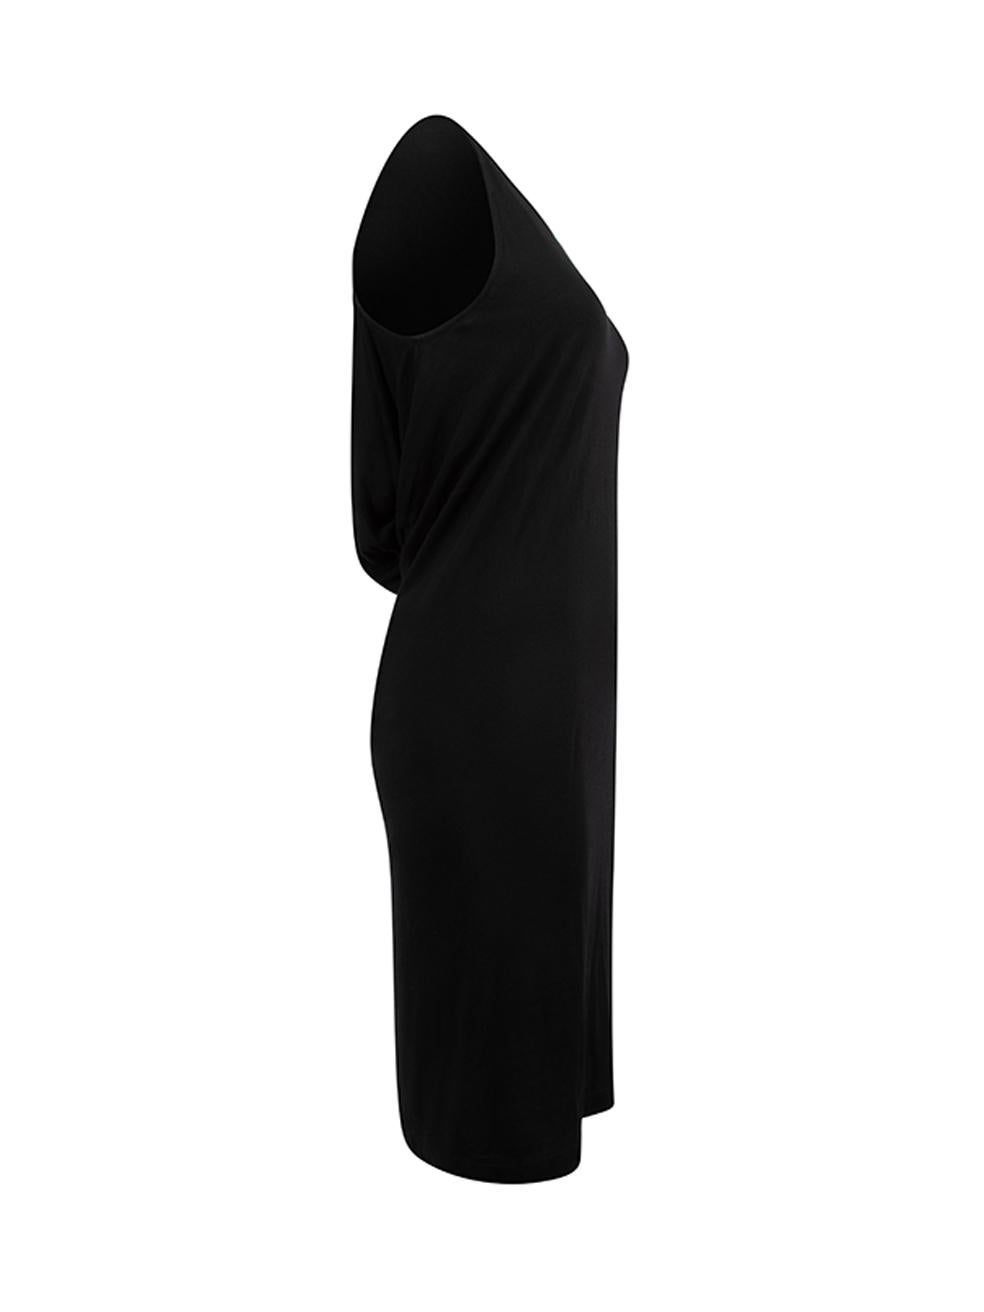 CONDITION is Very good. Minimal wear to dress is evident. Minimal wear to outer fabric which attracts fluff on this used Rag & Bone designer resale item. Details Black Viscose Mini dress Round neckline Sleeveless Wrap back detail with button closure